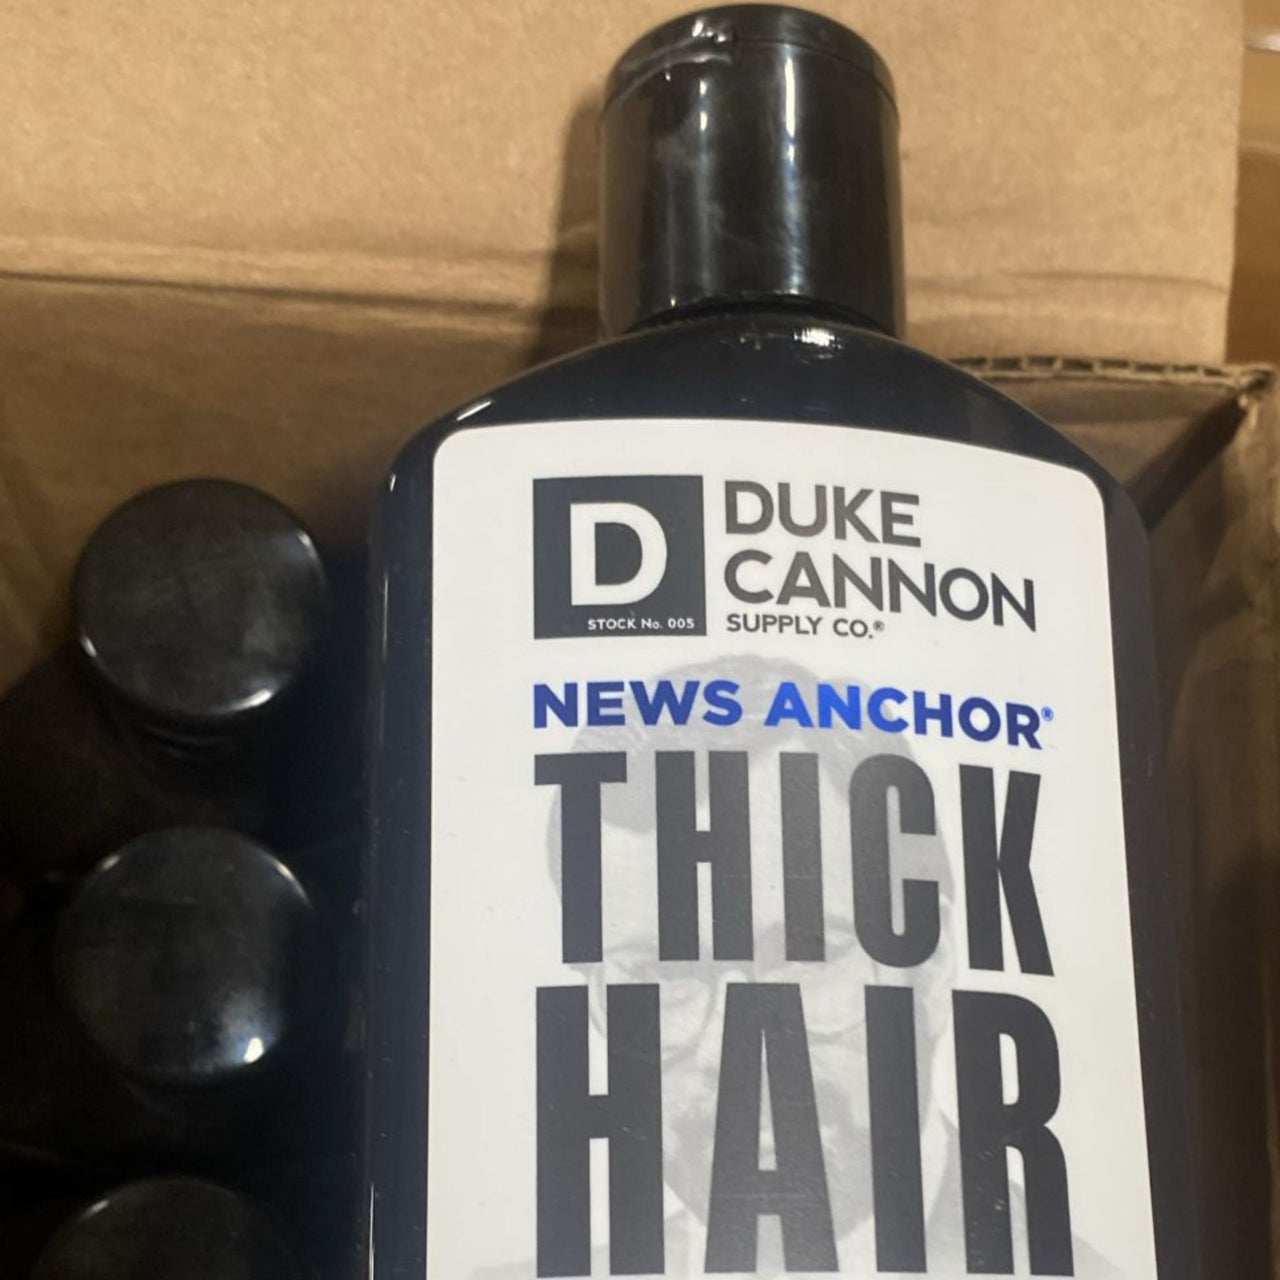 Duke Cannon News Anchor Thick Hair 2 IN 1 Shampoo & Conditioner